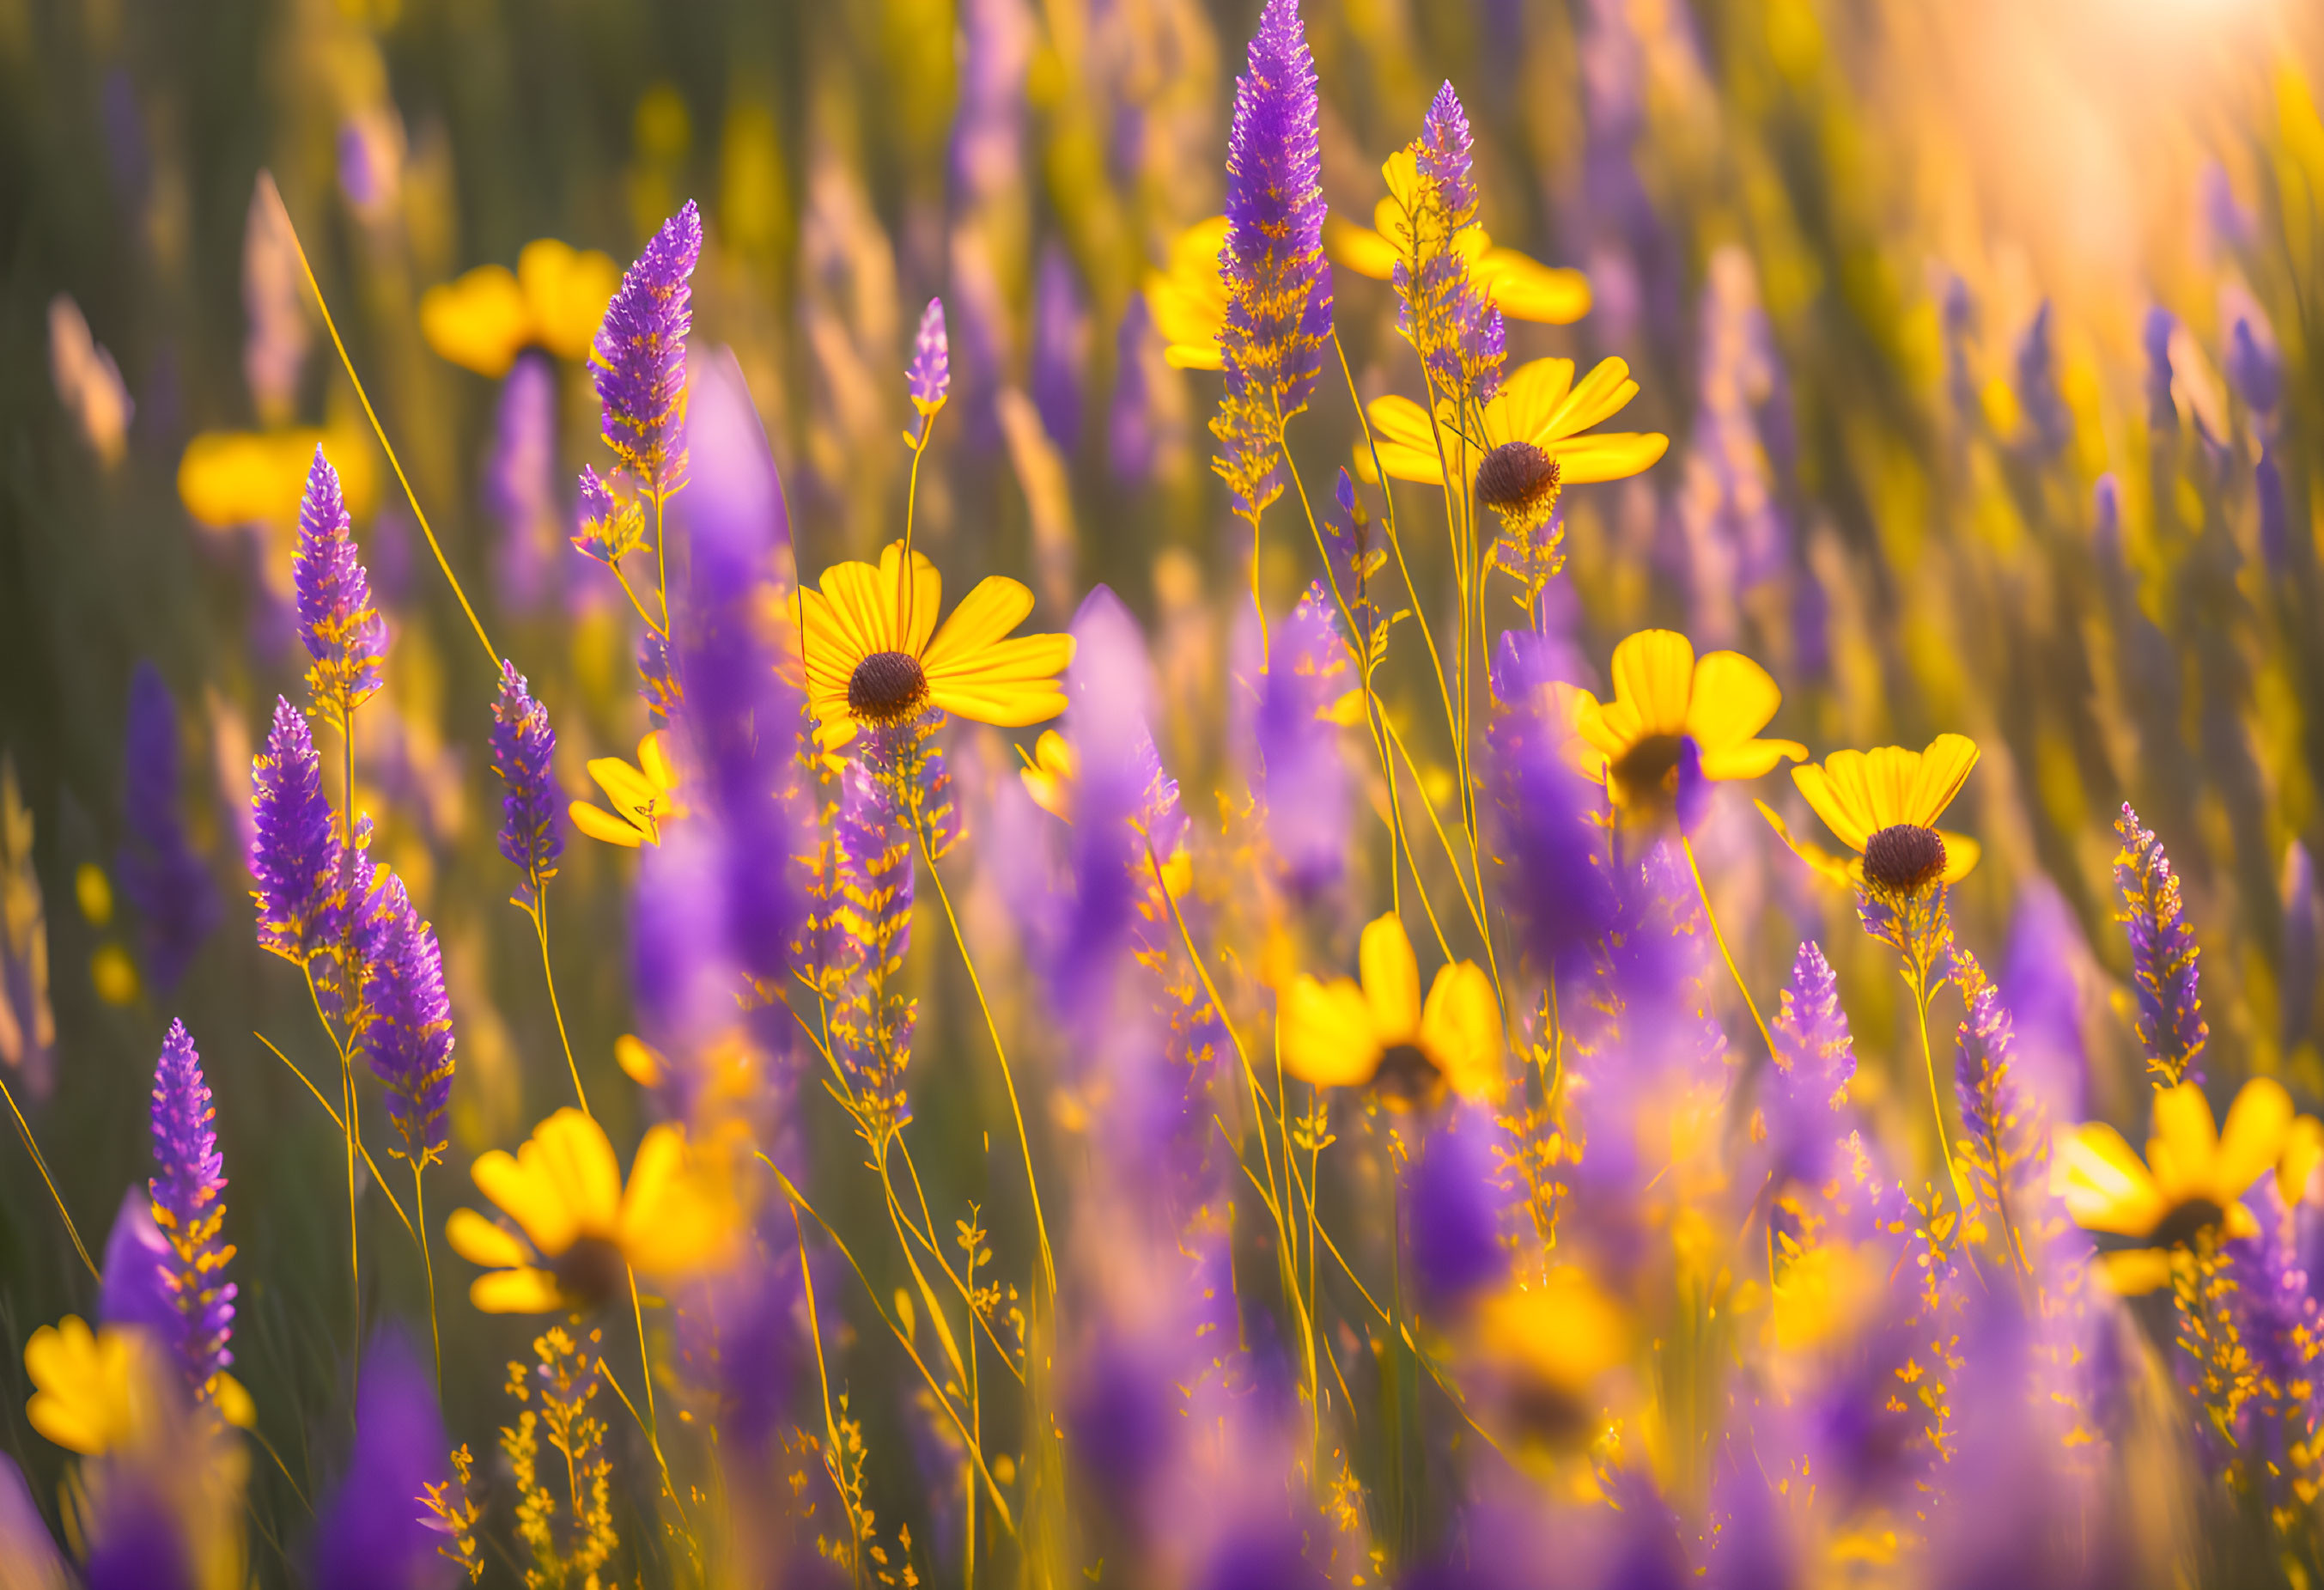 Sunset Blooms: A Colorful Field Portrait